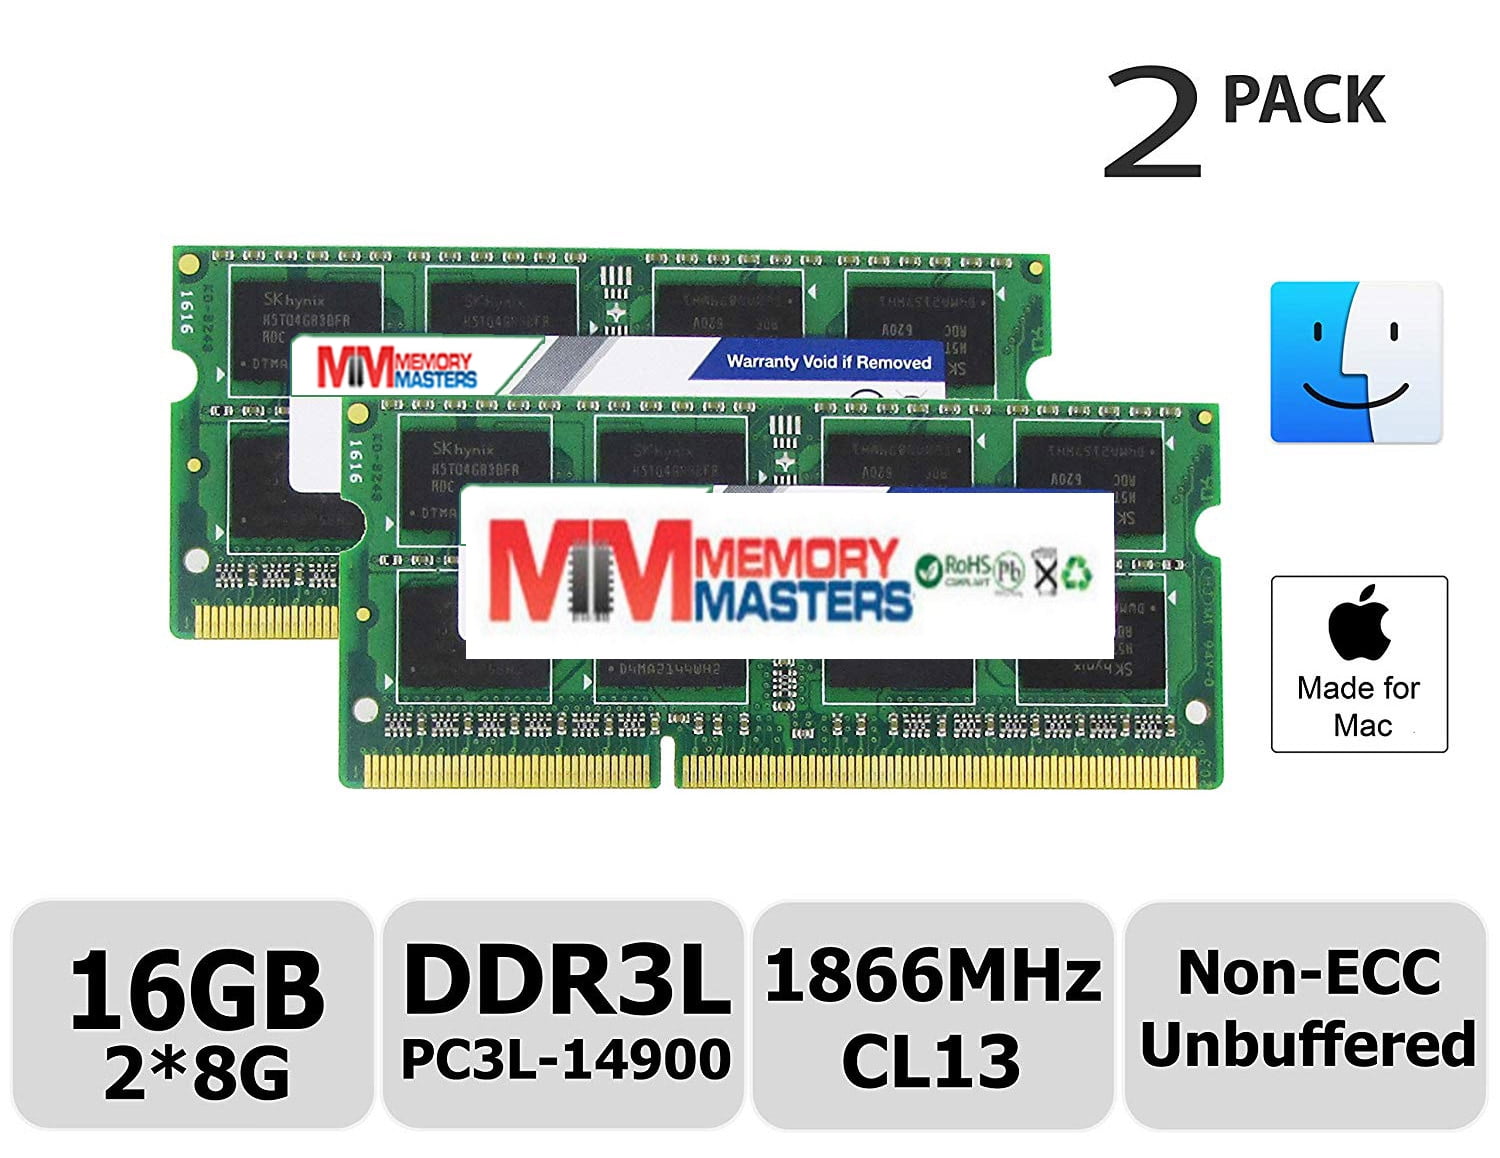 parts-quick 16GB DDR3 Memory for Tyan Computers Motherboard S7040 Server PC3L-12800 1600MHz ECC Registered Low Voltage DIMM